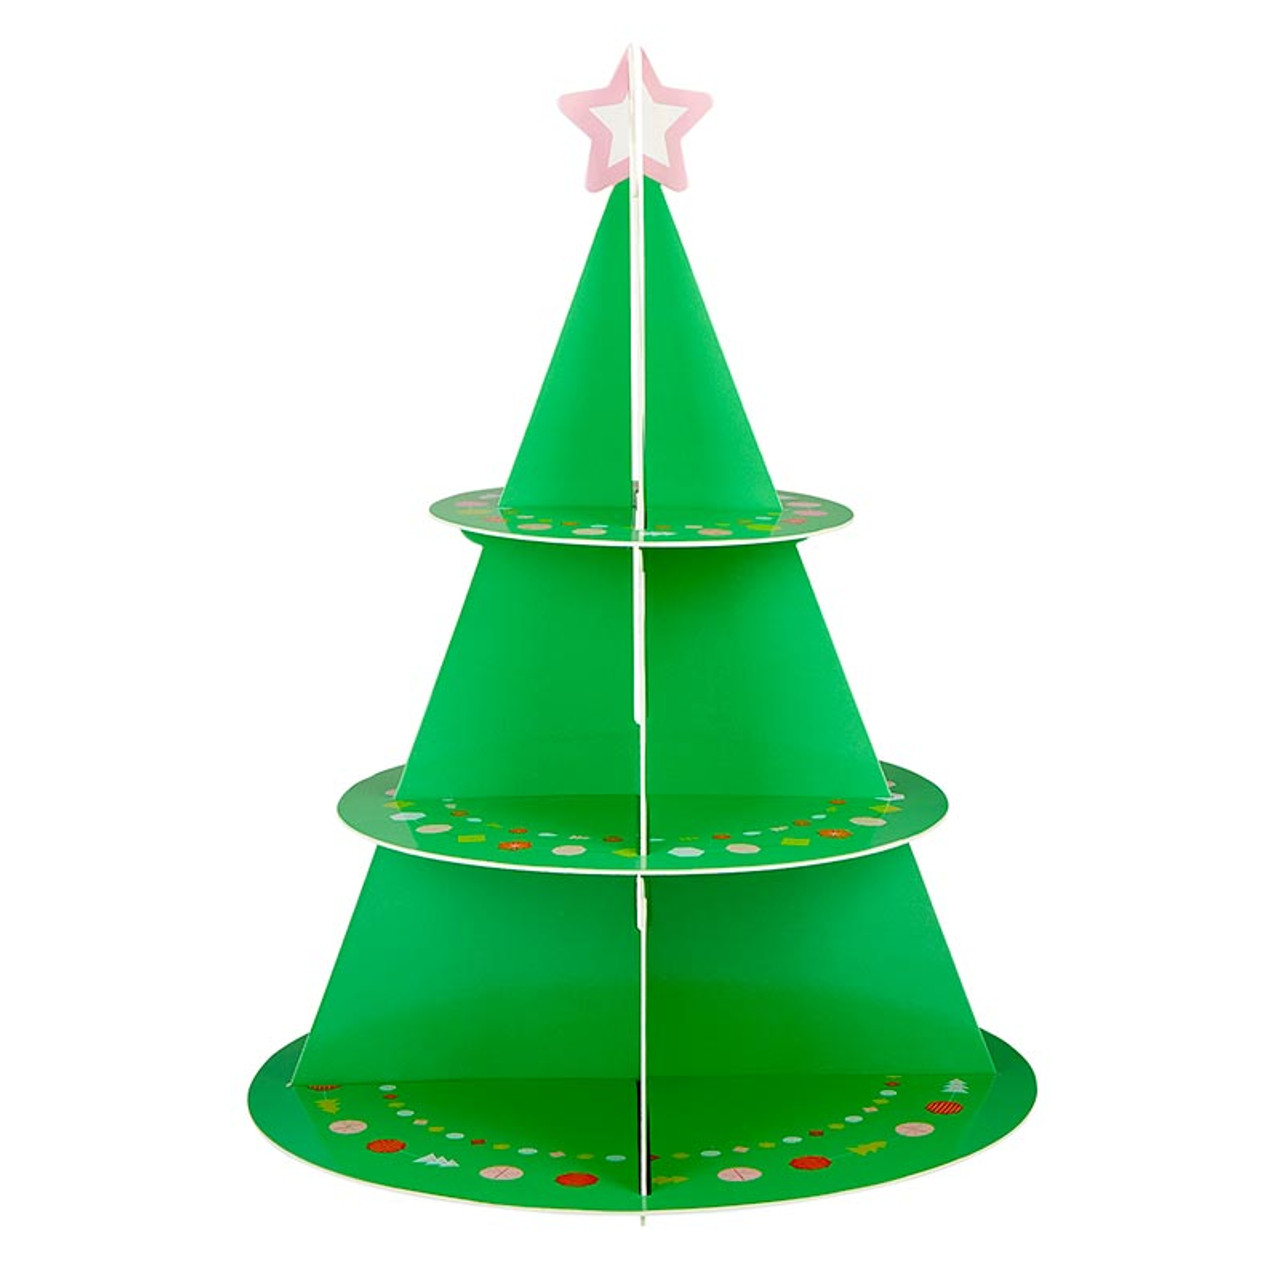 Festive Green Paper Cups 20ct, Party Supplies